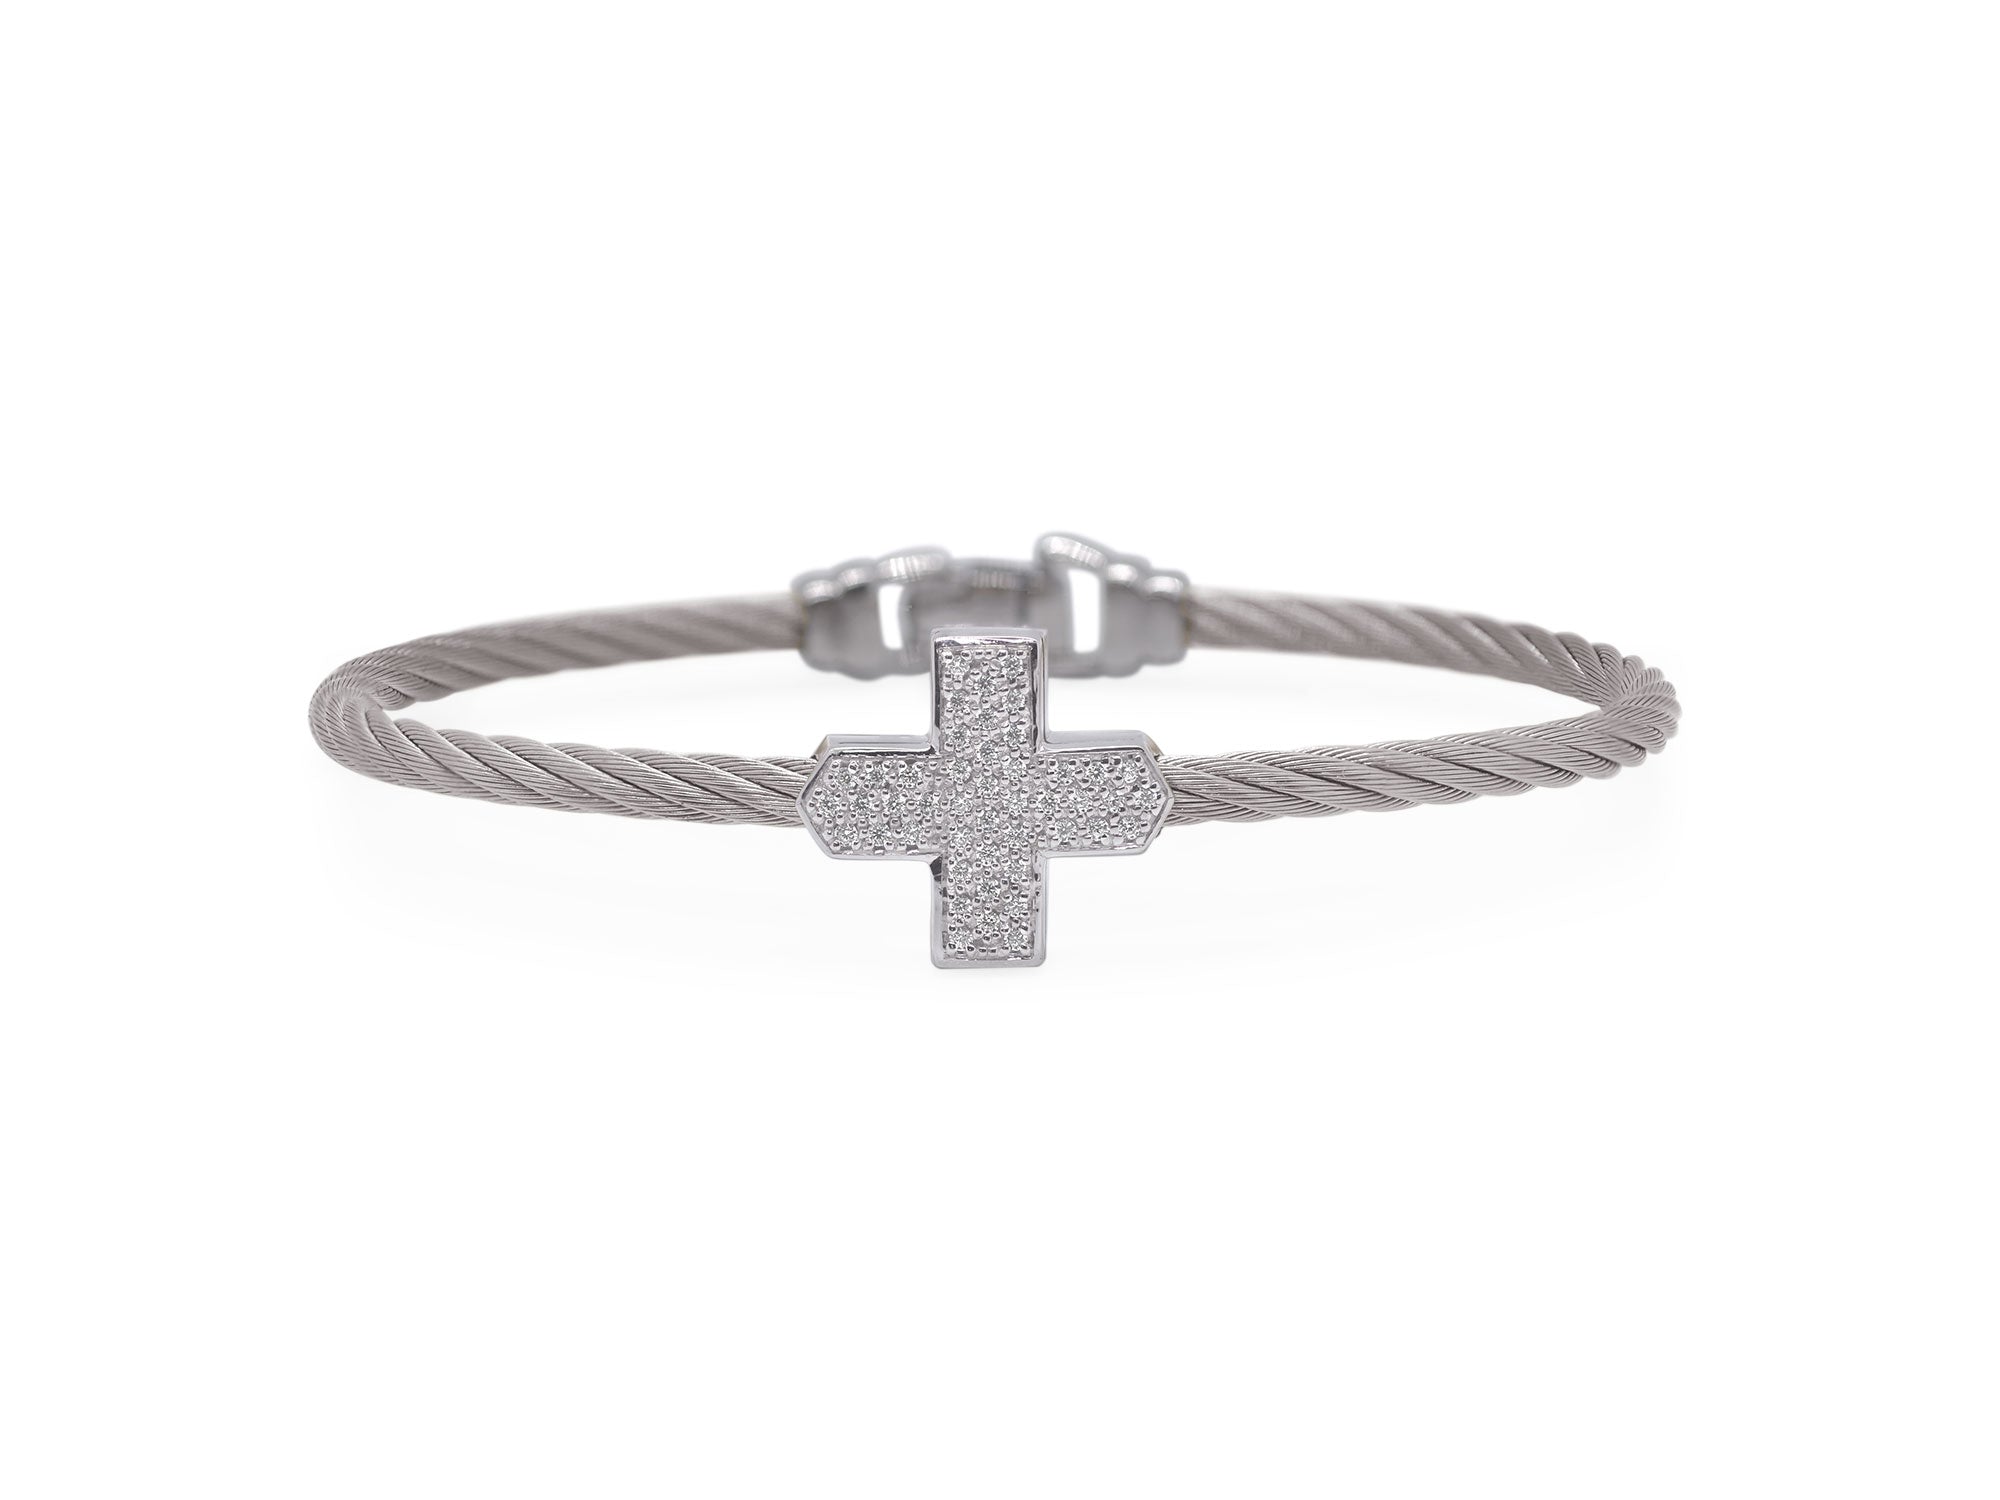 Grey Cable Taking Shapes Cross Bracelet with 18K Gold & Diamonds